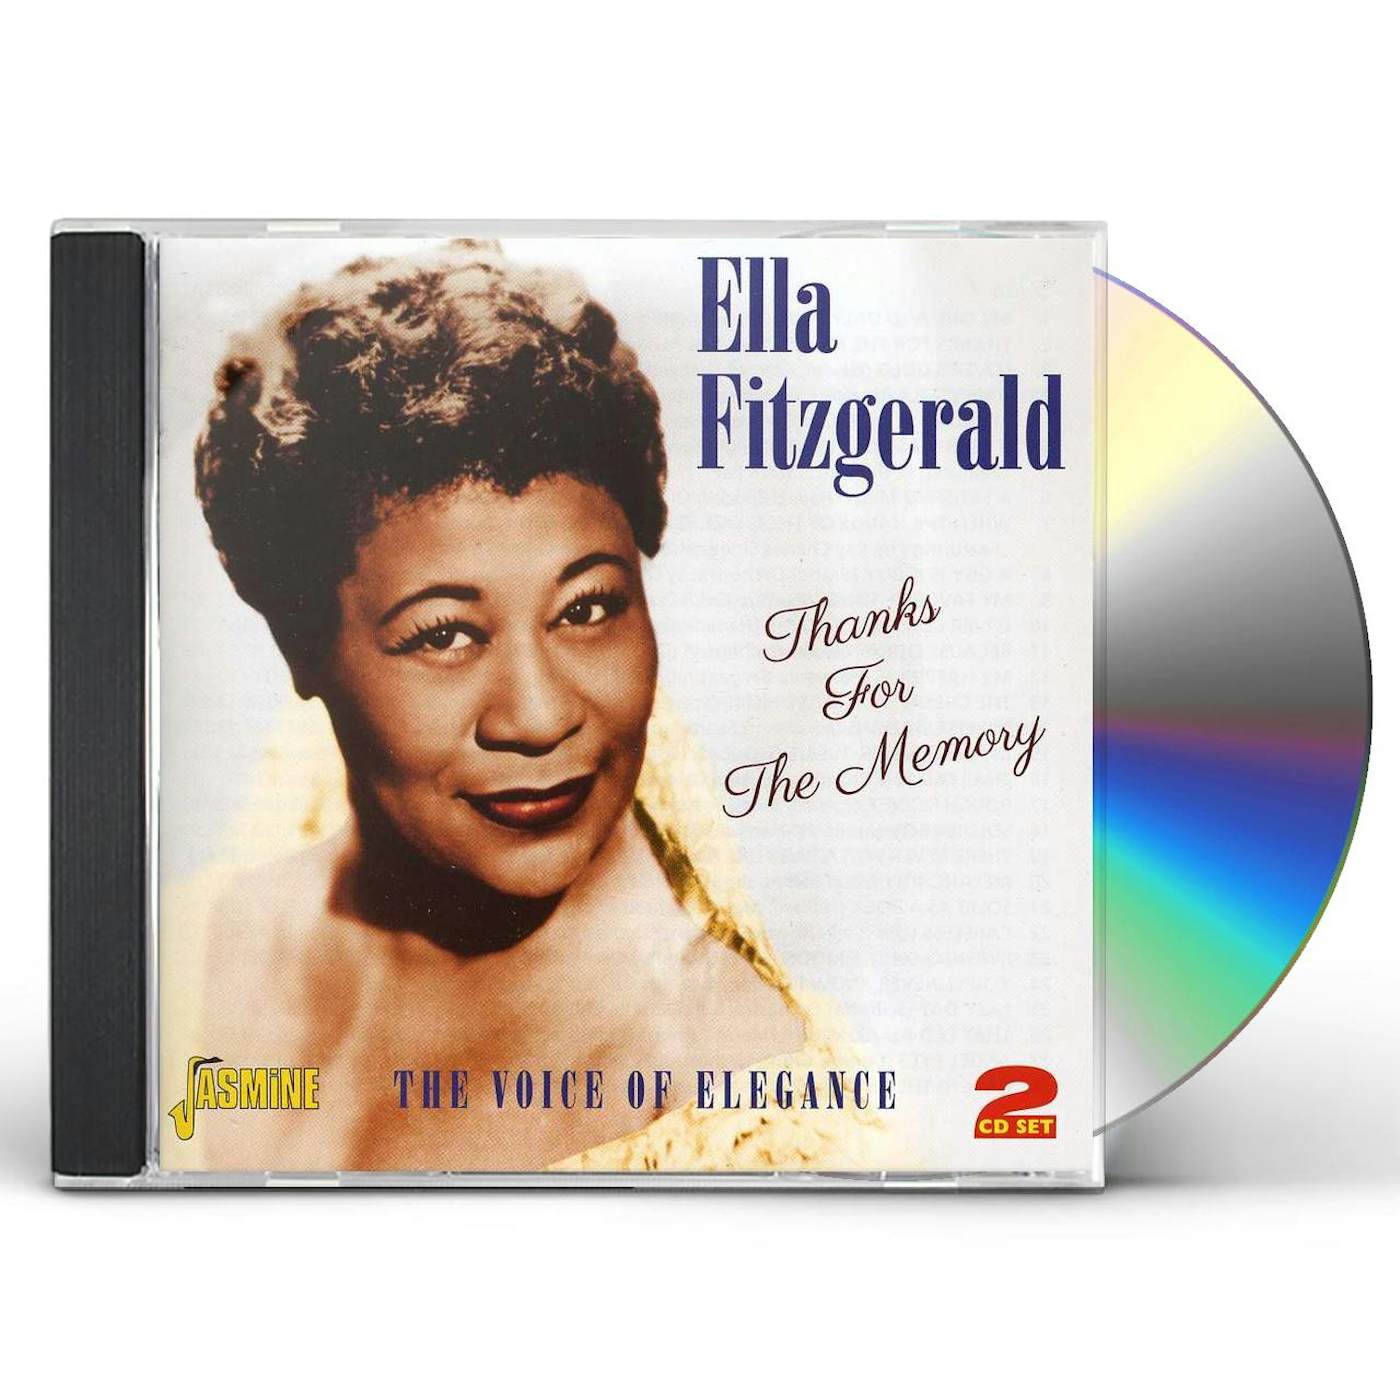 Ella Fitzgerald THANKS FOR THE MEMORY: VOICE OF ELEGANCE CD